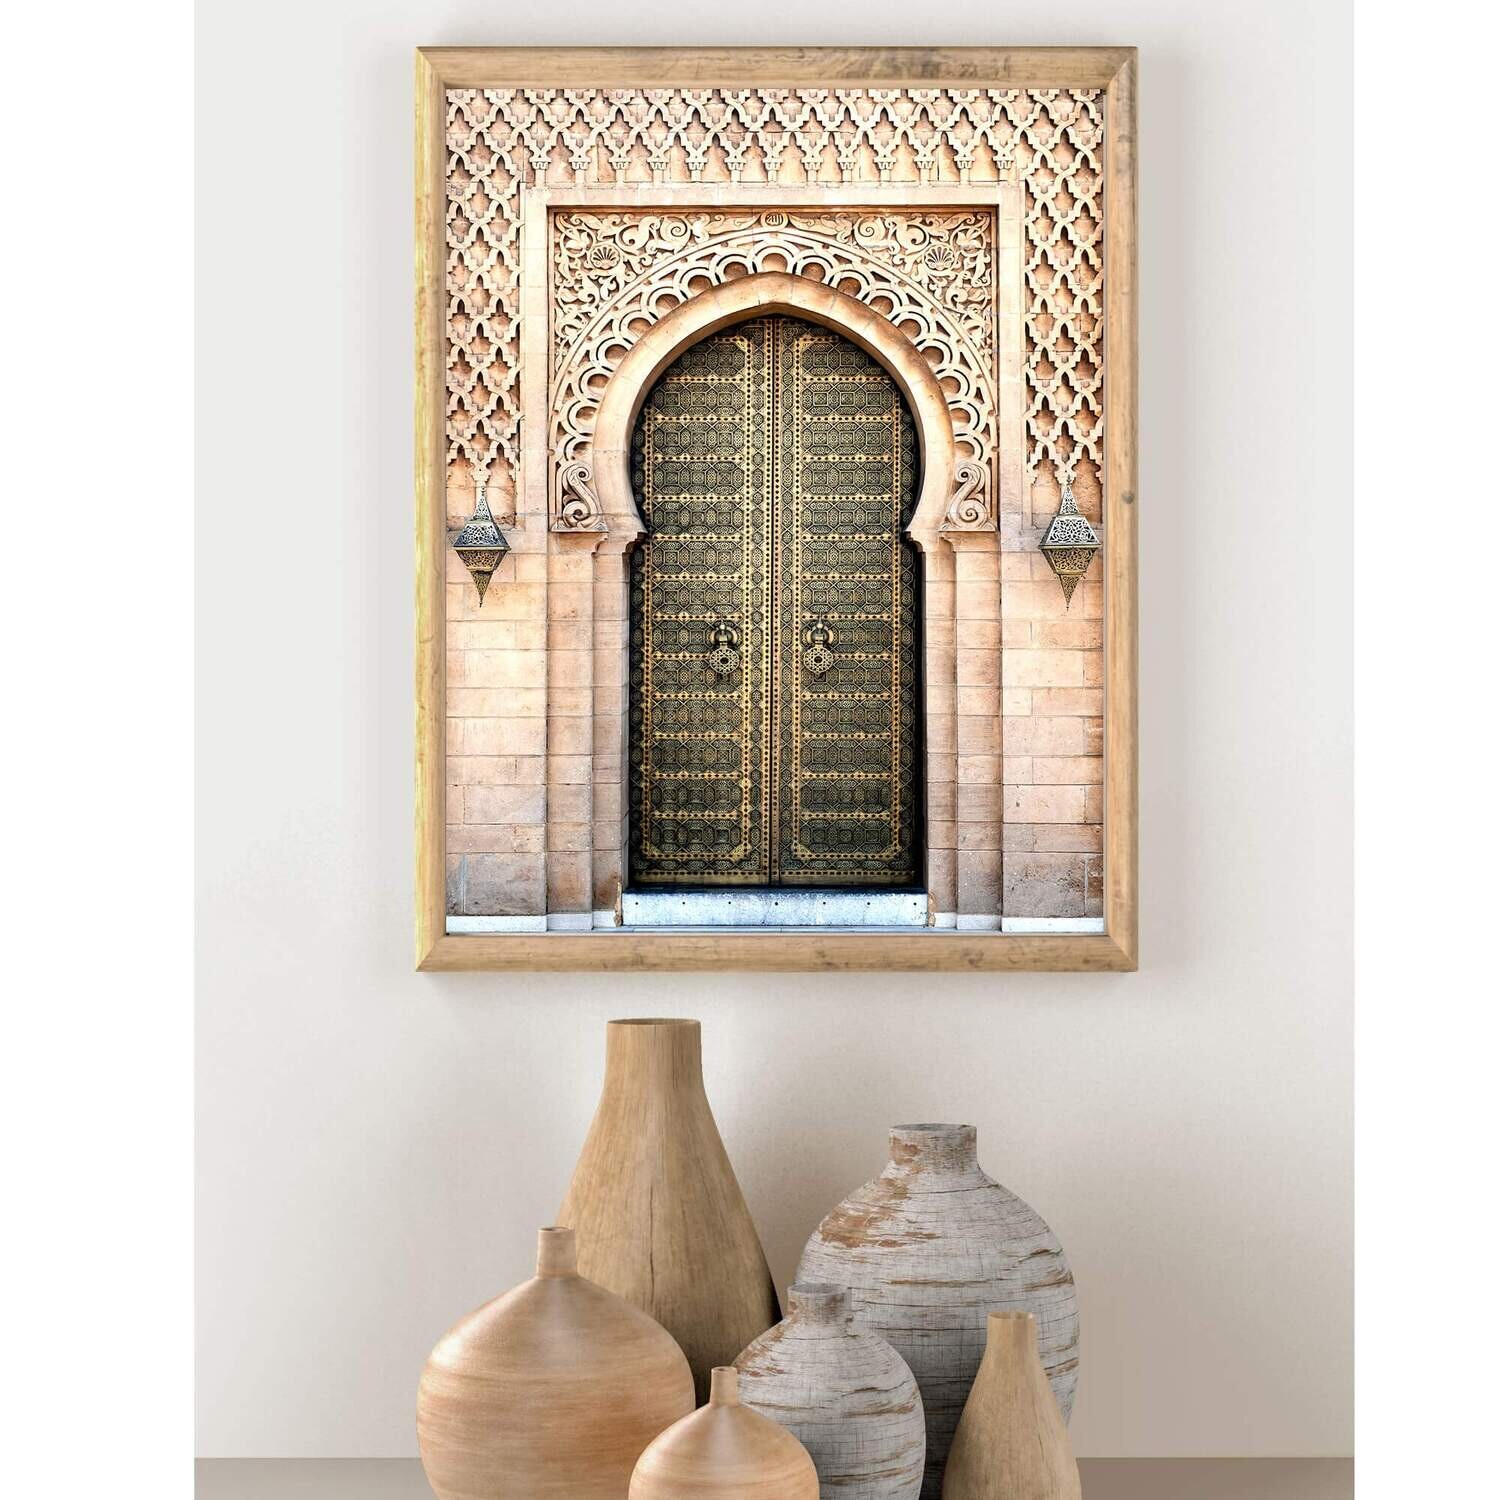 Wall Decor with Photo Frame / Unframed / on Paper Canvas, Canvas, Frame unframed, Door Wall Art &amp; rajasthan royals image, Size: Small 8 x 11 inch A4 Size, Medium: Fine Art Paper, No Frame or Framed: No Frame only Print